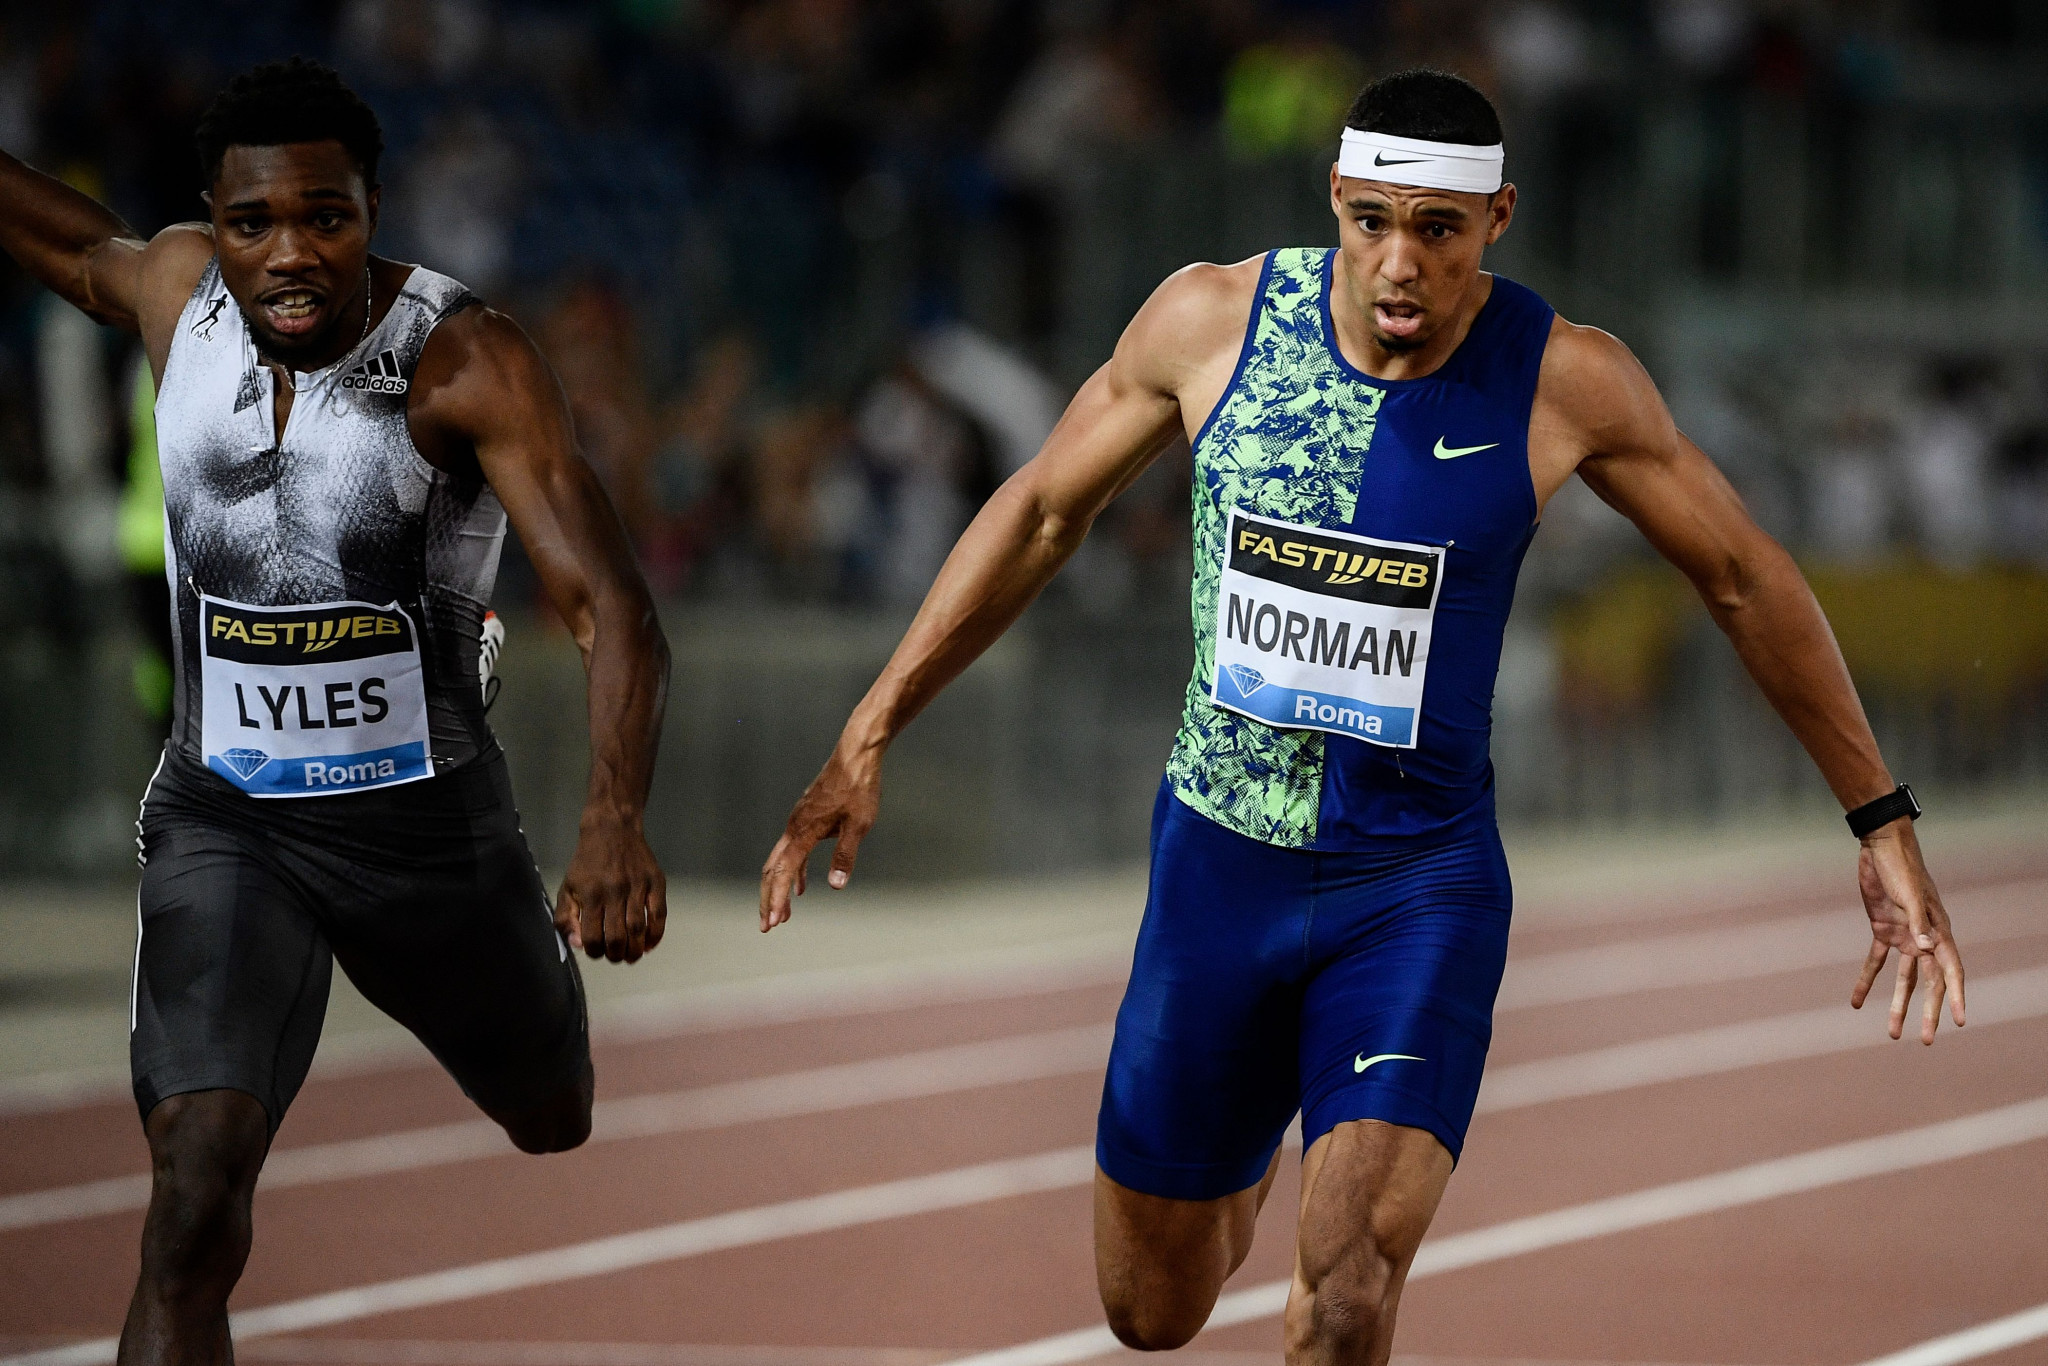 Norman wins super-fast 200m duel with Lyles at Rome Diamond League meeting